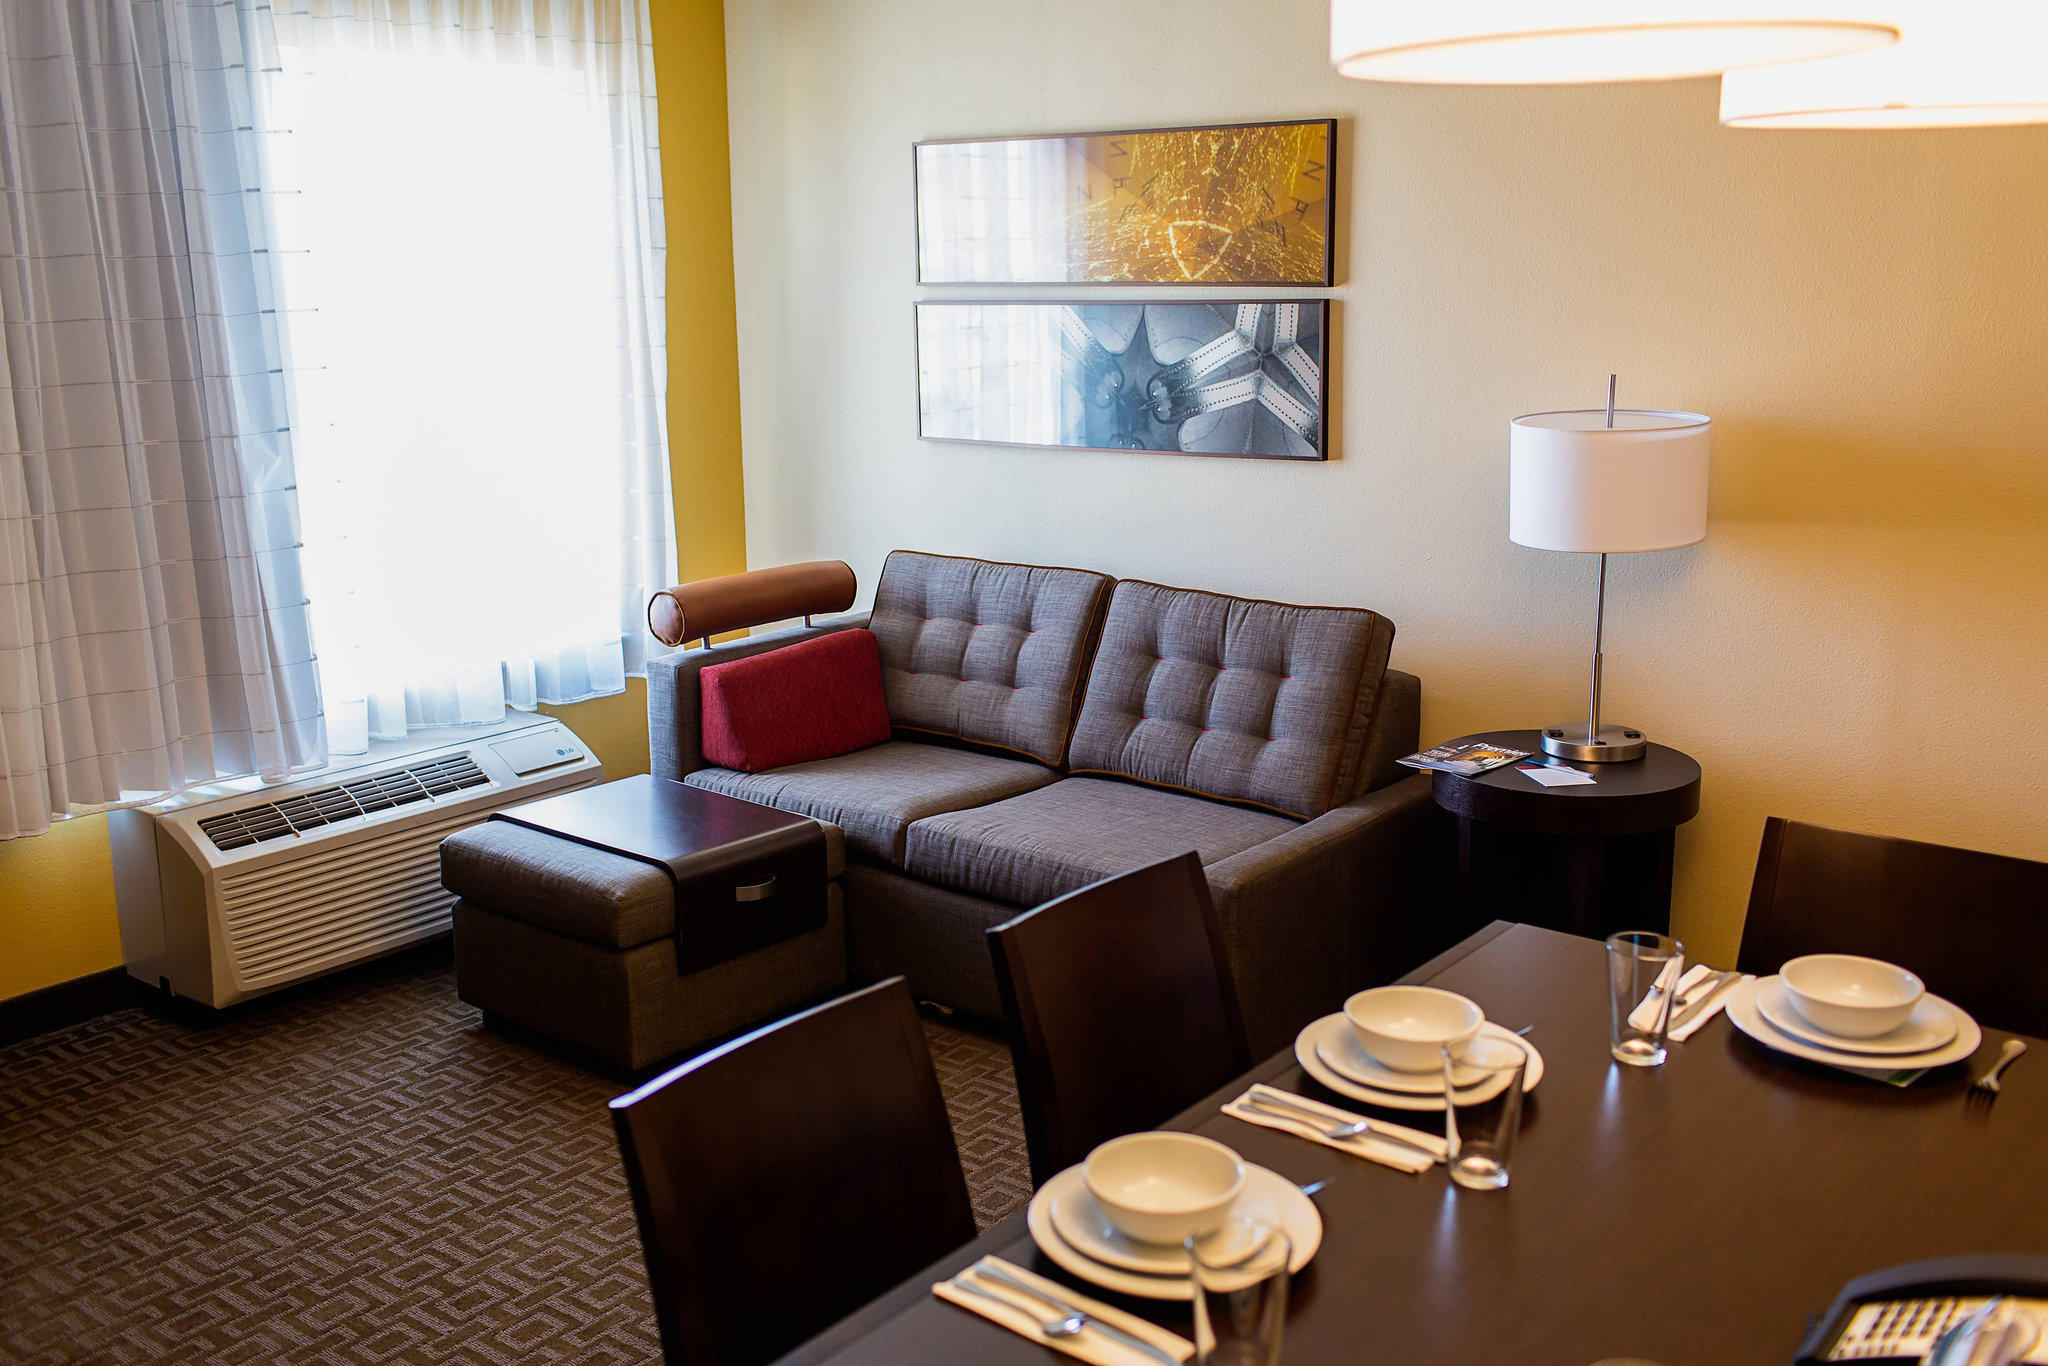 TownePlace Suites by Marriott Lancaster Photo